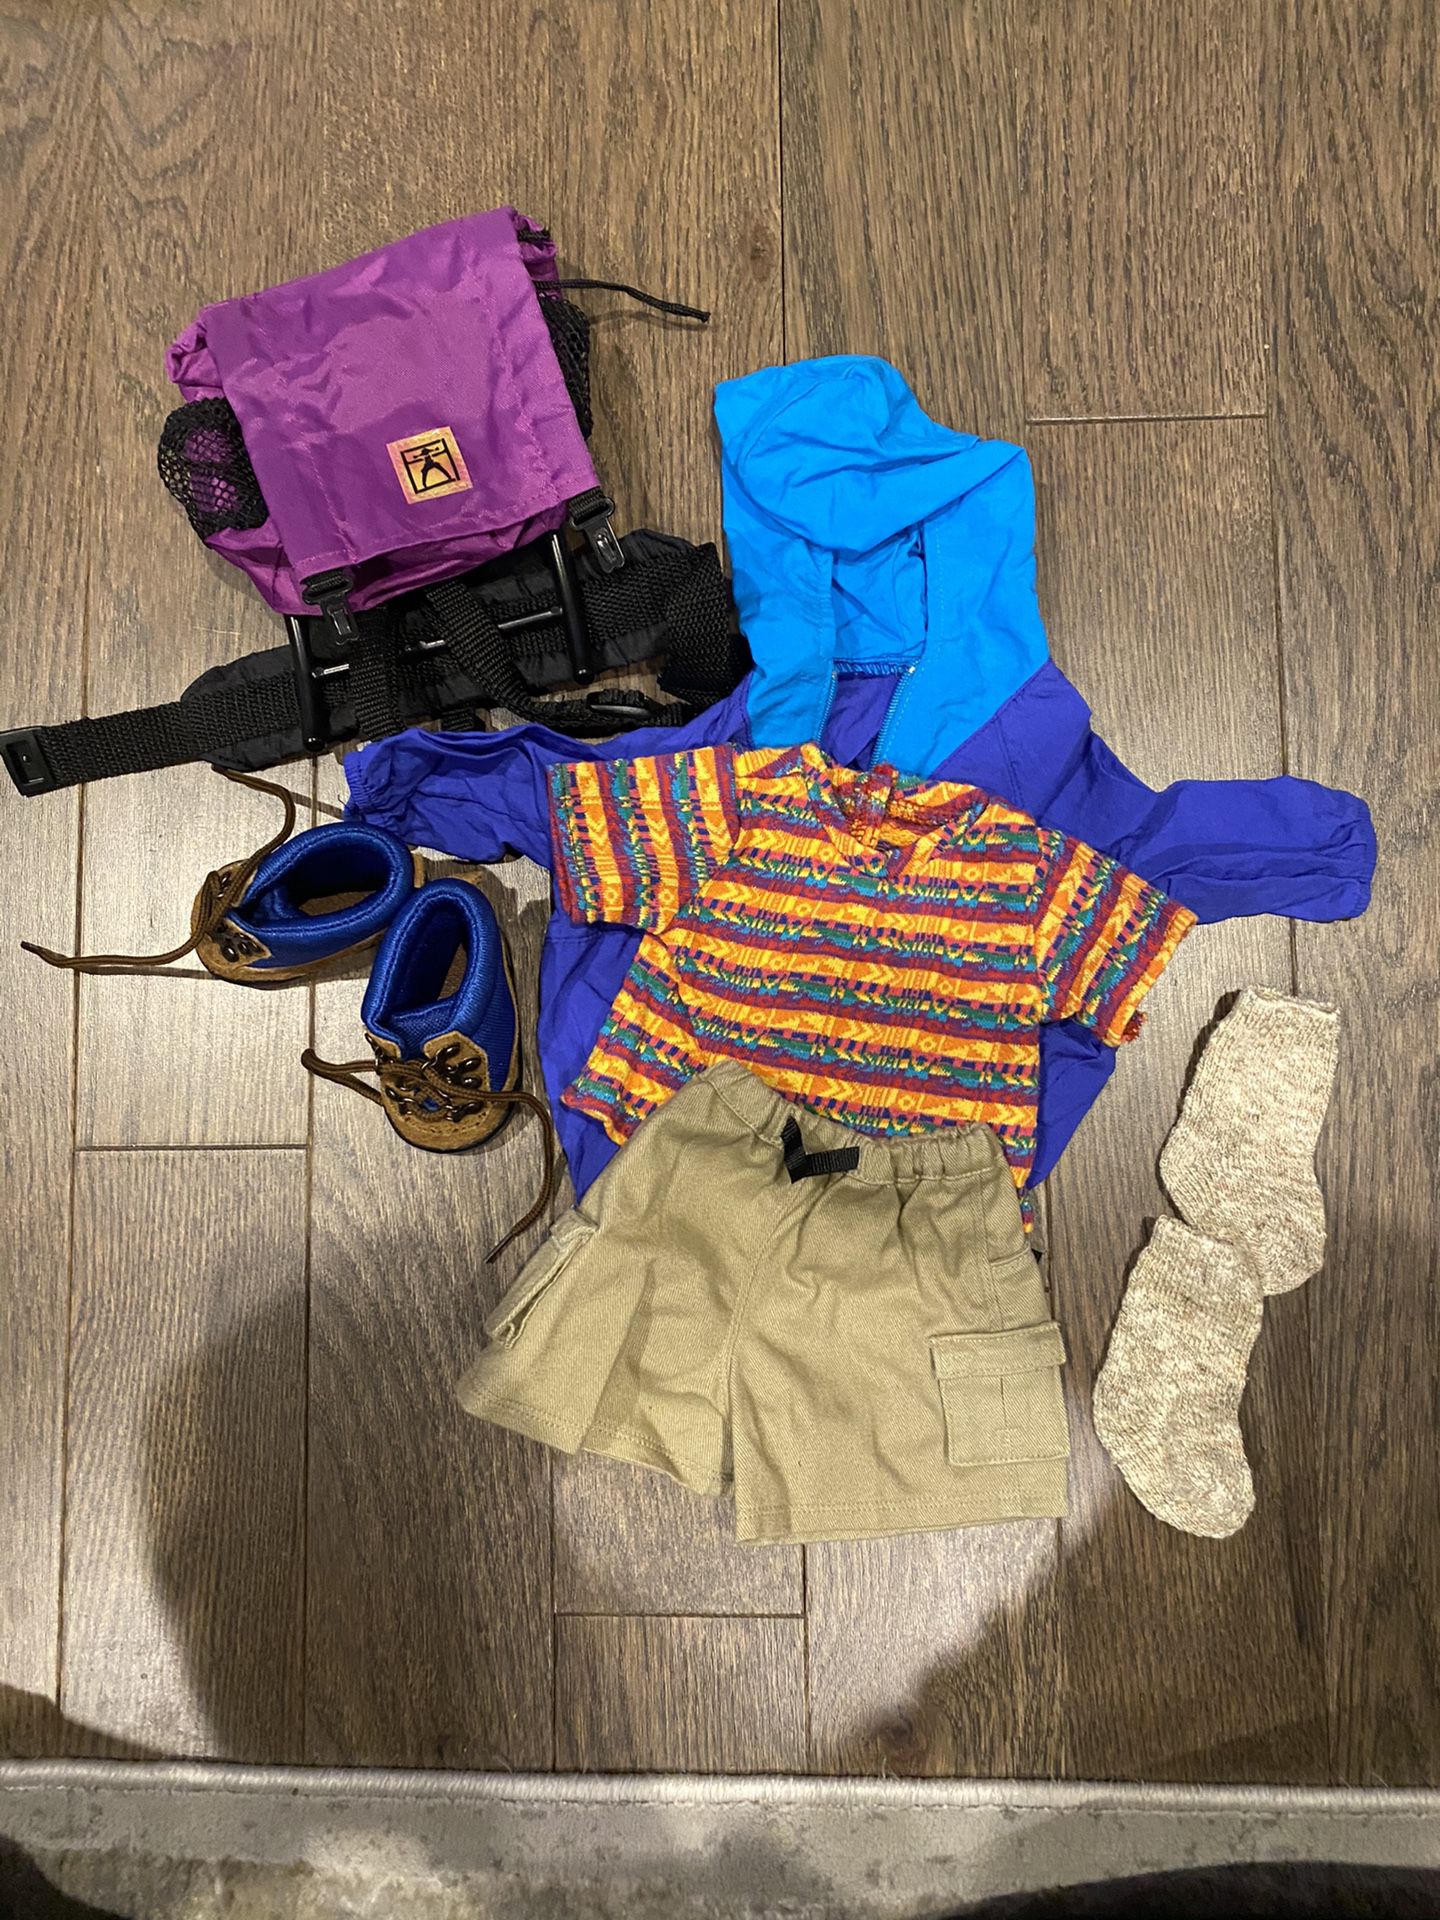 American Girl Backpacking Outfit